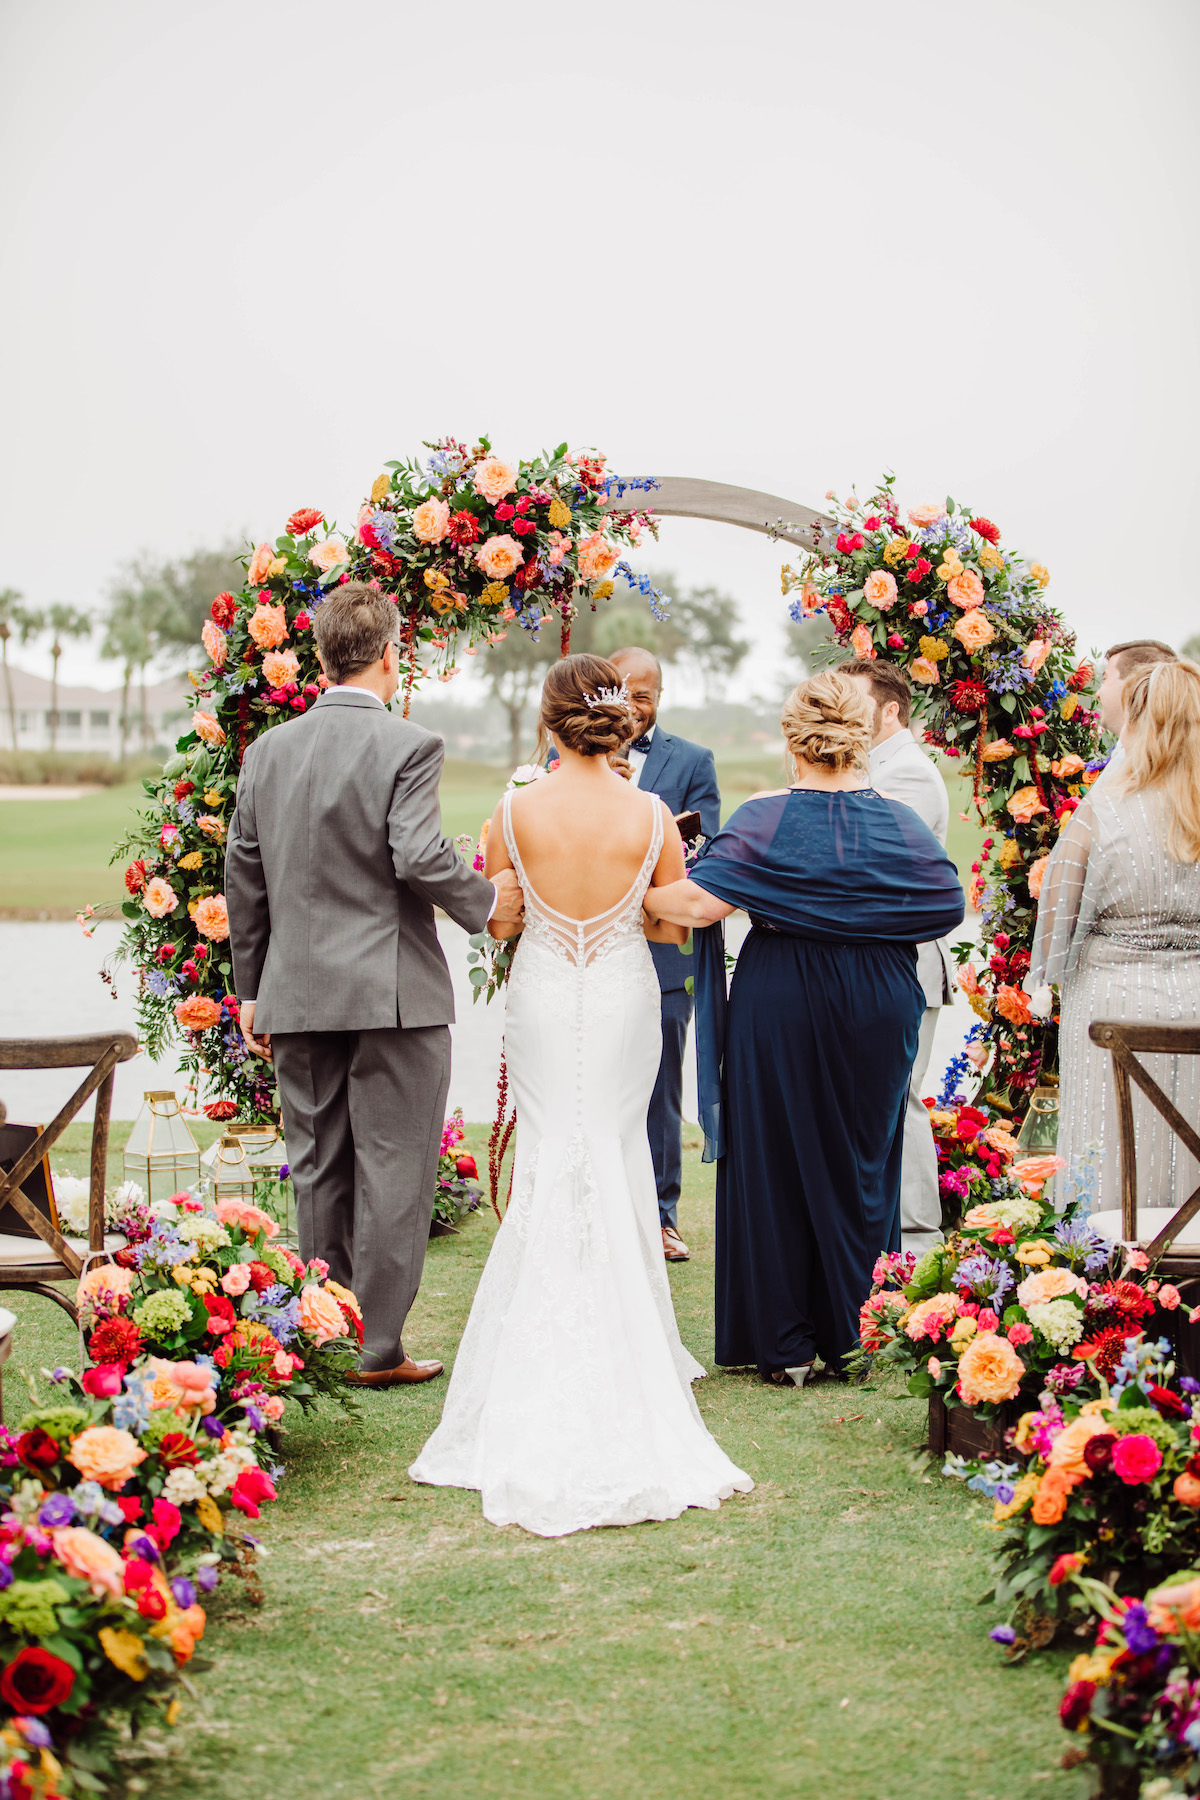 Outdoor wedding ceremony decor with colorful flowers - Bohemian Road Photography